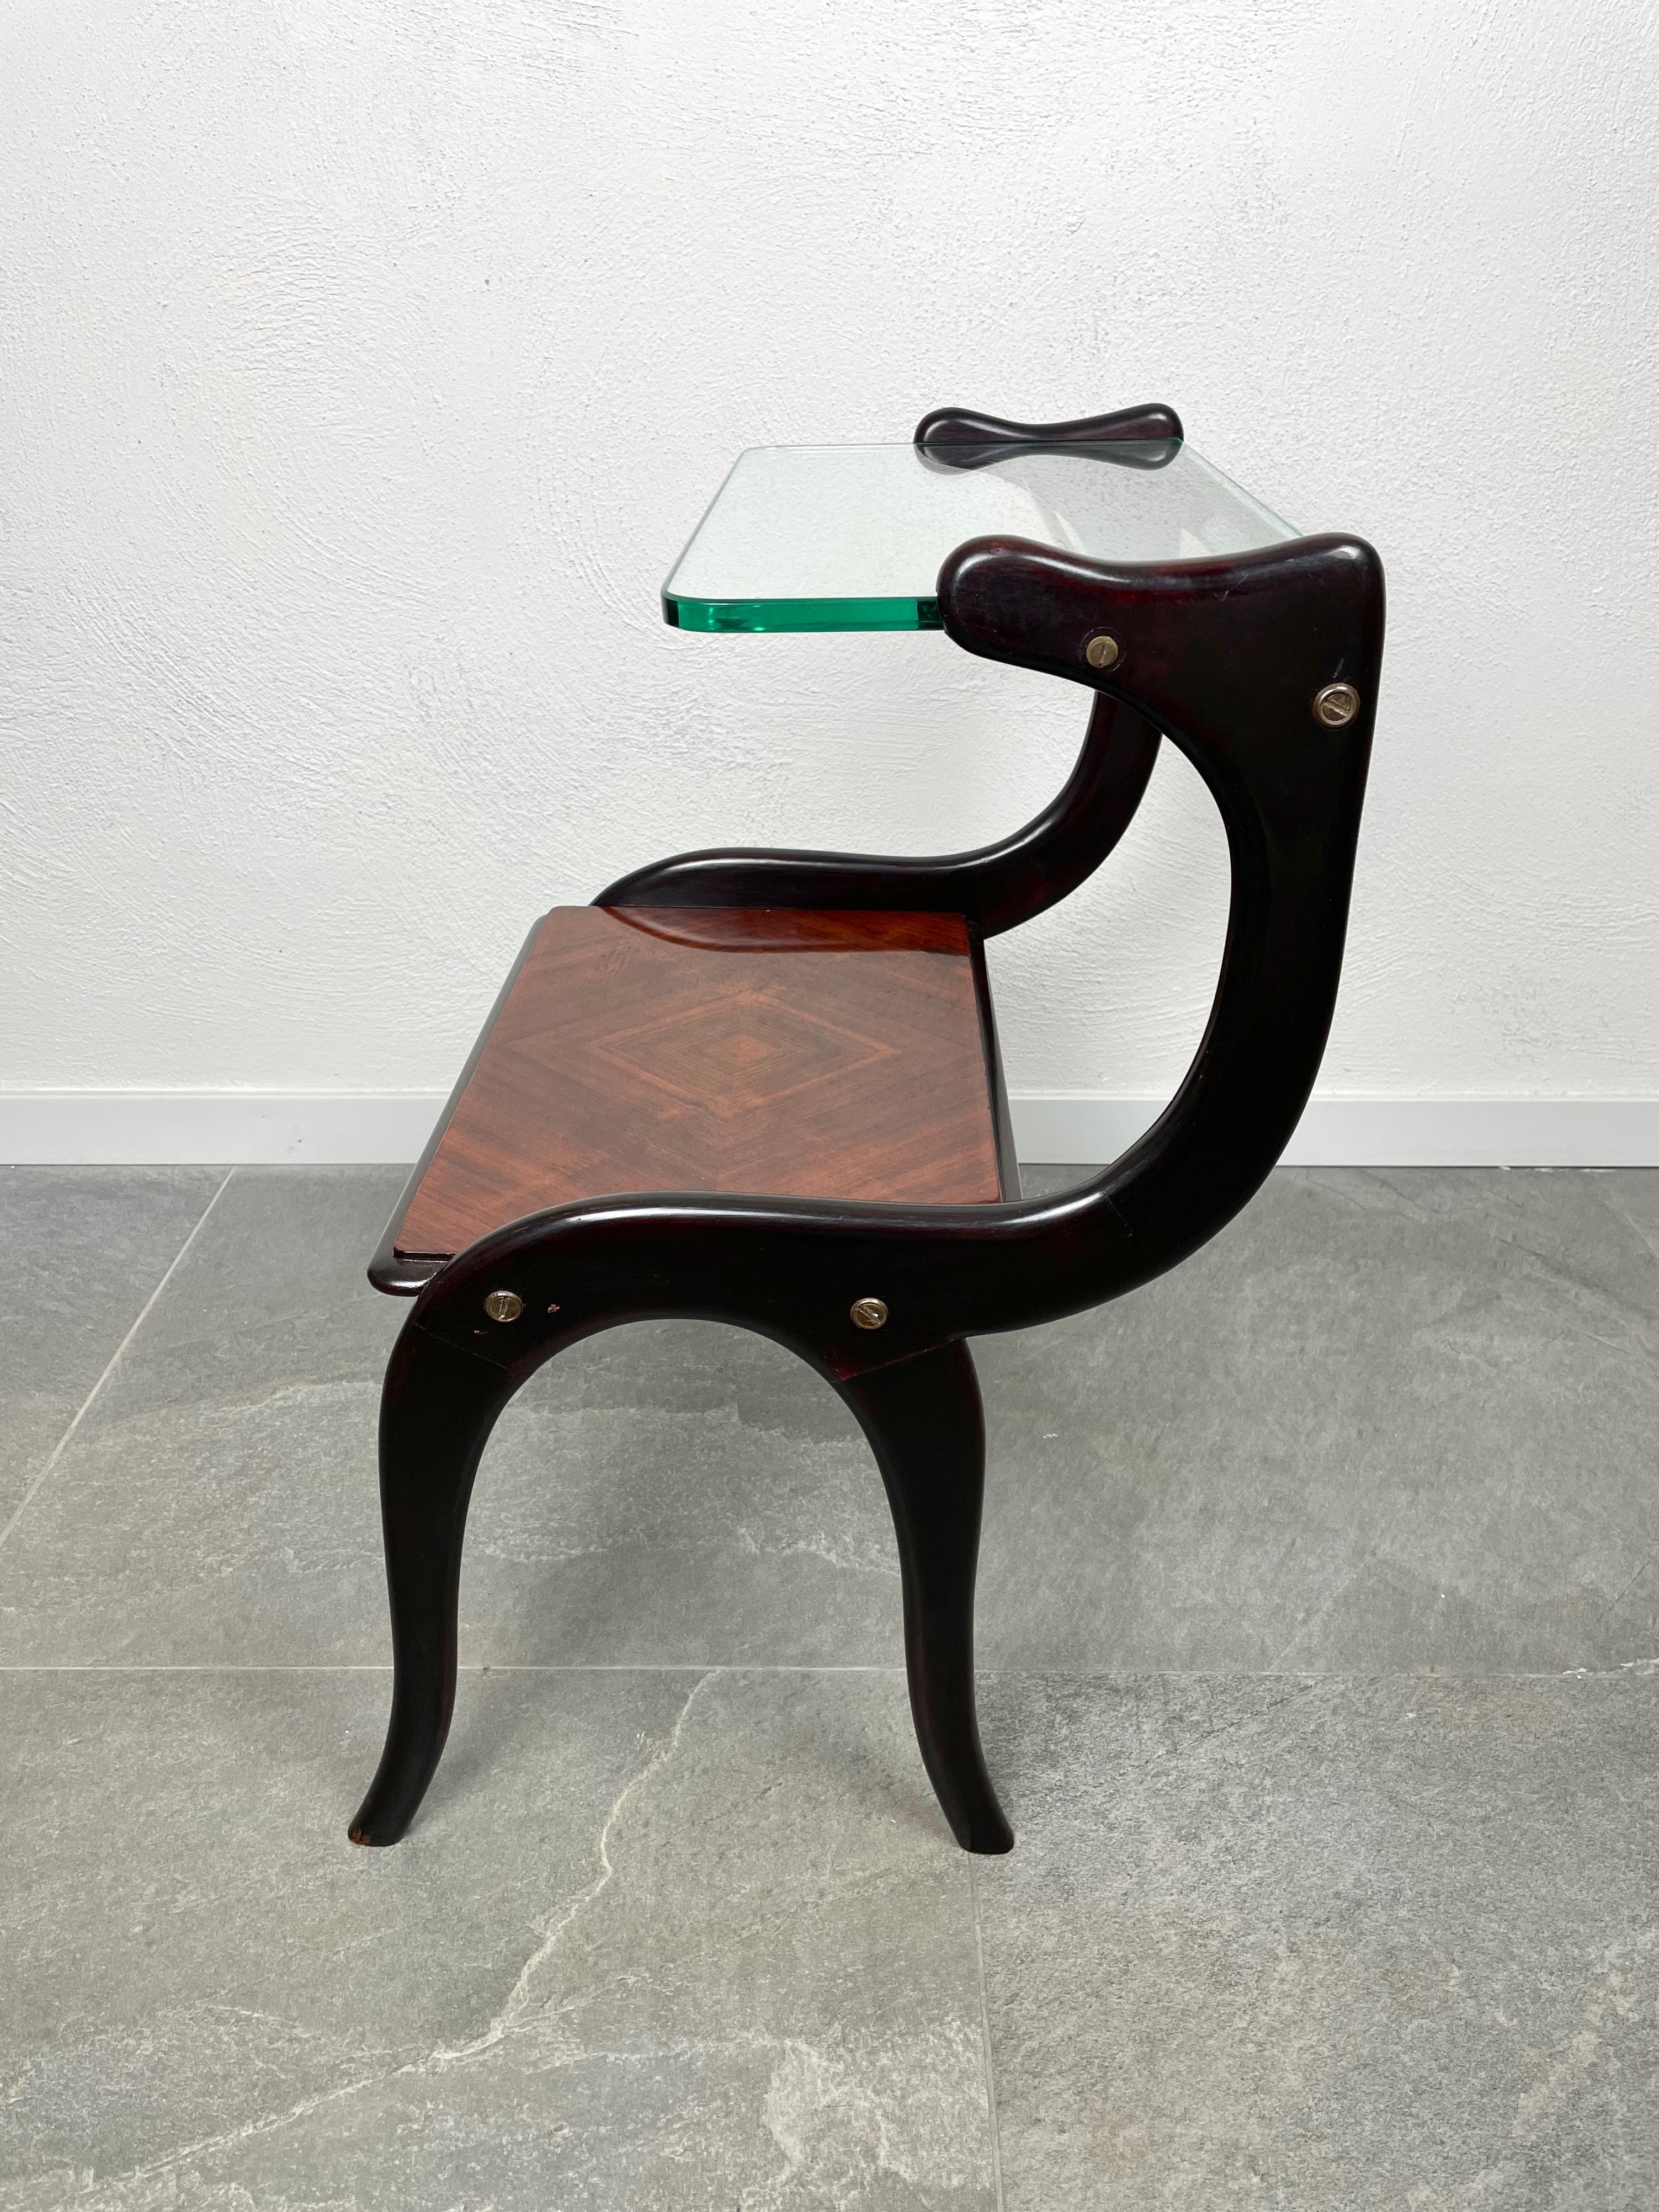 Ebonized Wood and Glass Side Table Attributed to Ico Parisi, Italy, 1950s For Sale 1